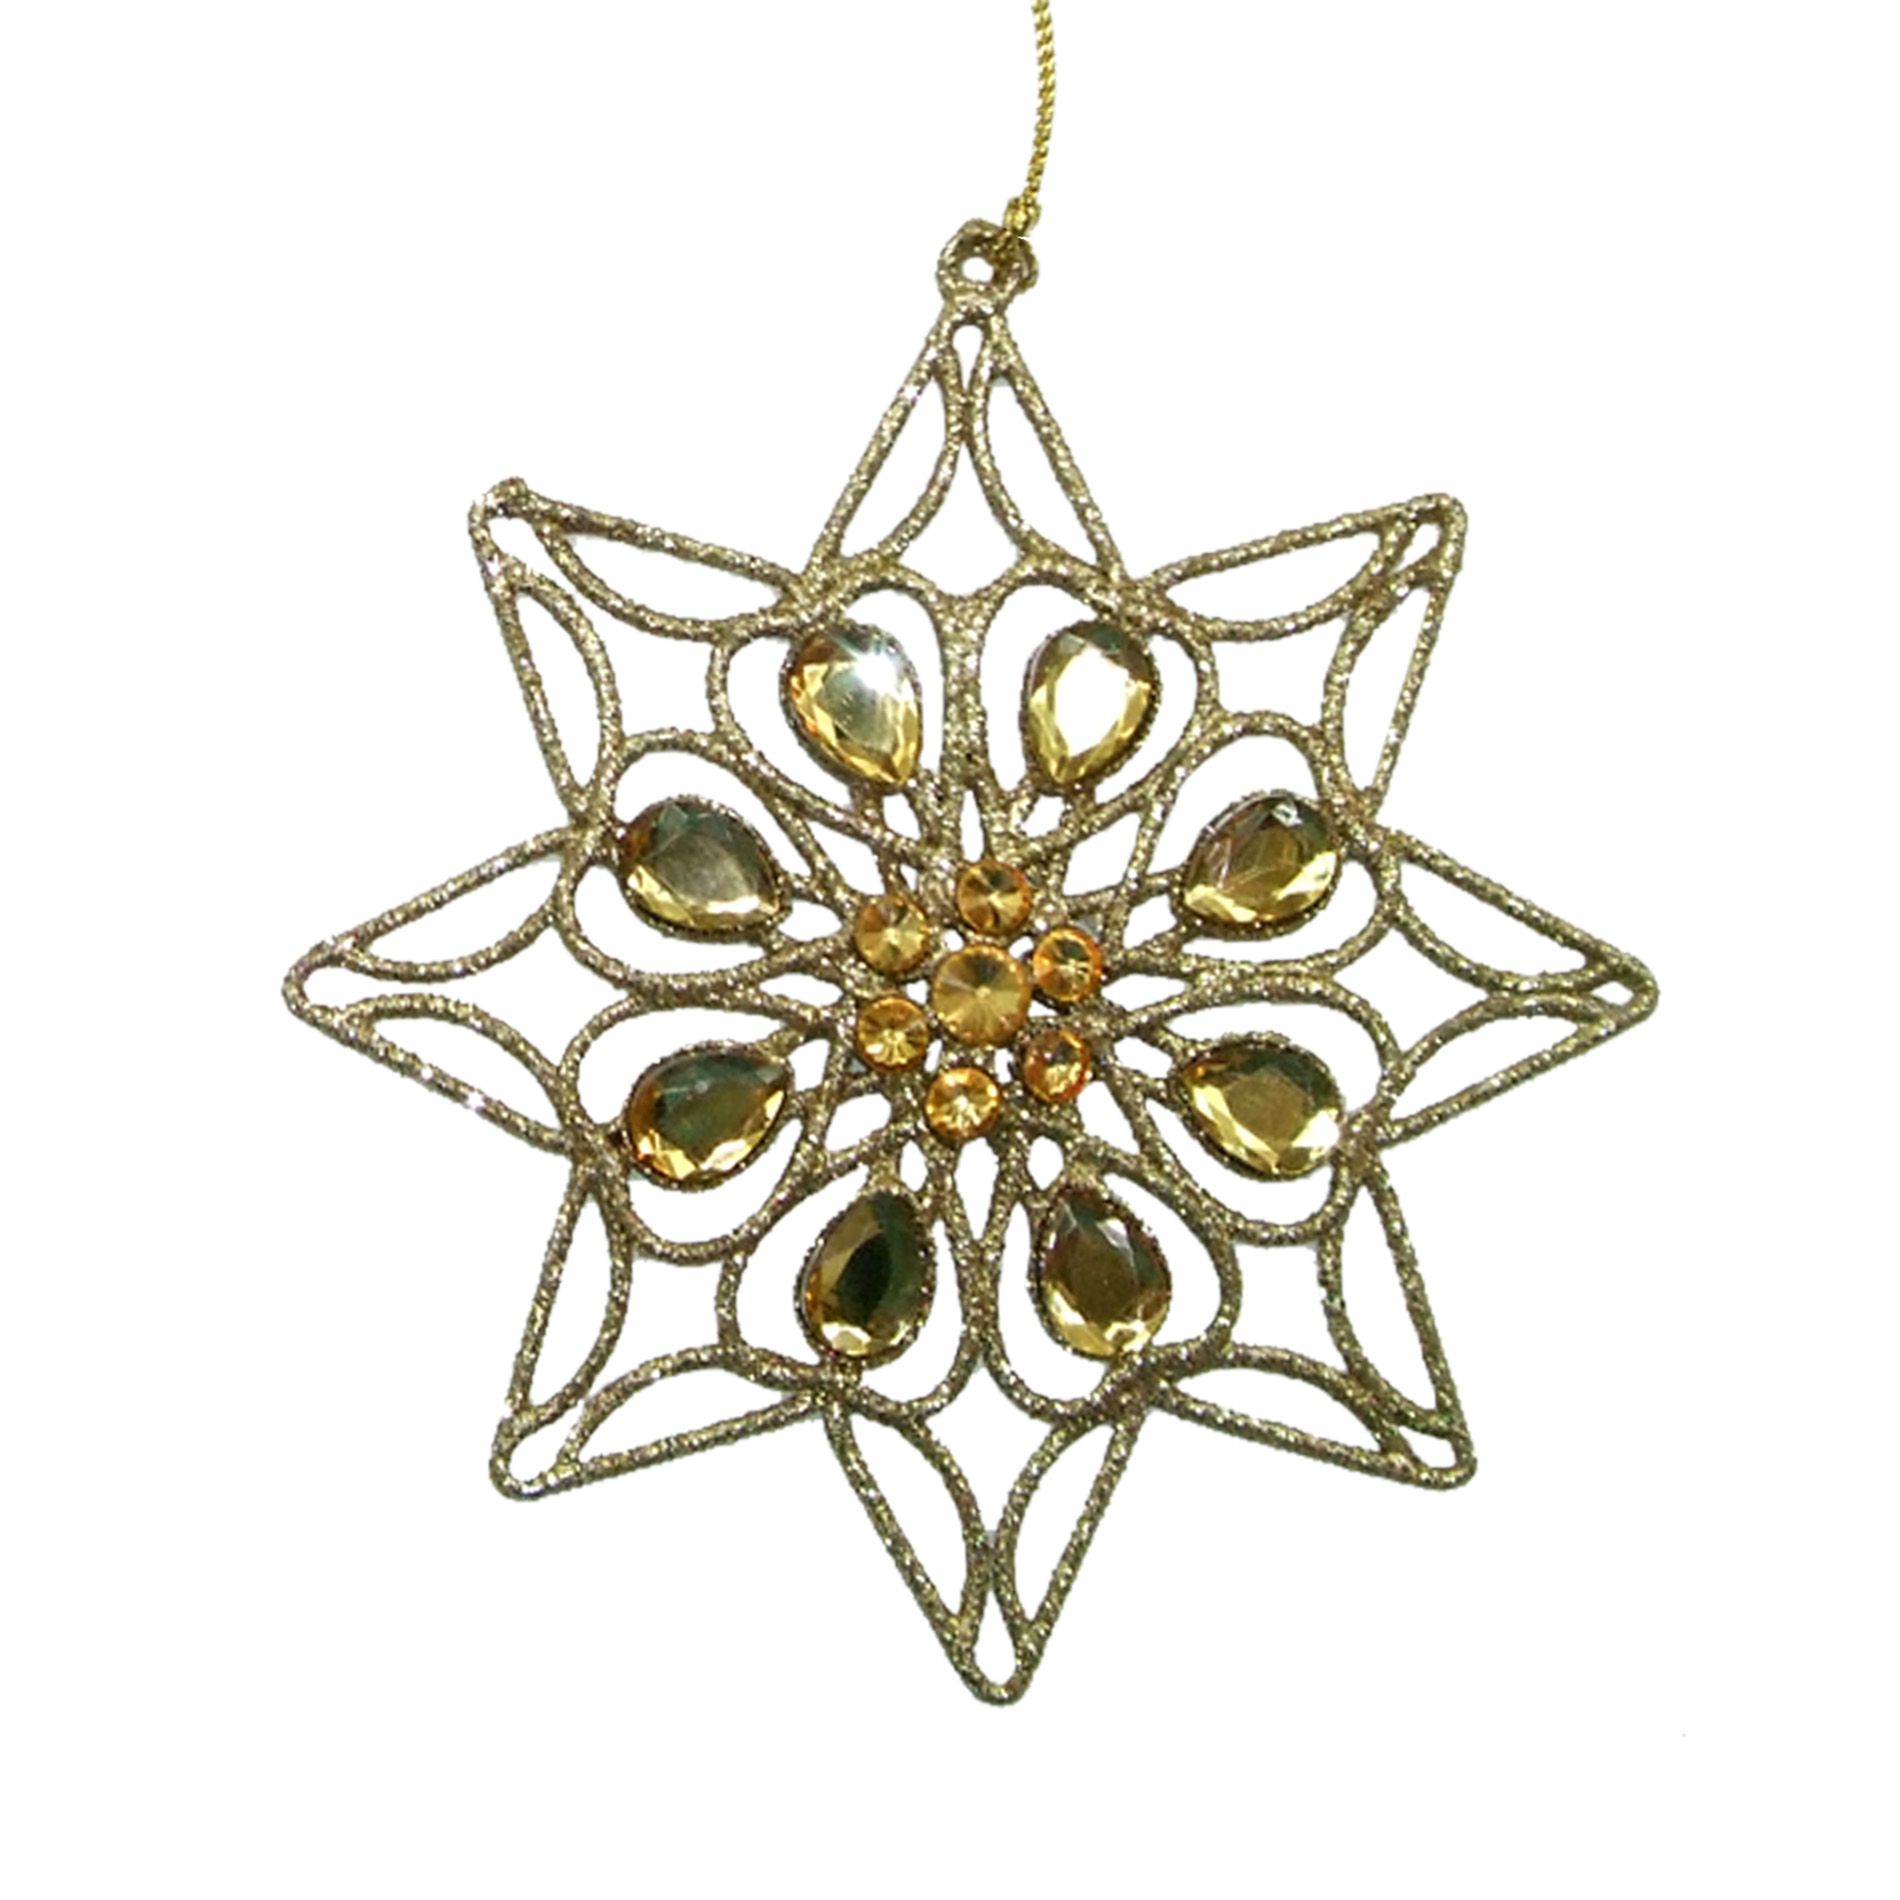 Jaclyn Smith Today Golden Heritage Metal Glitter Star Ornament